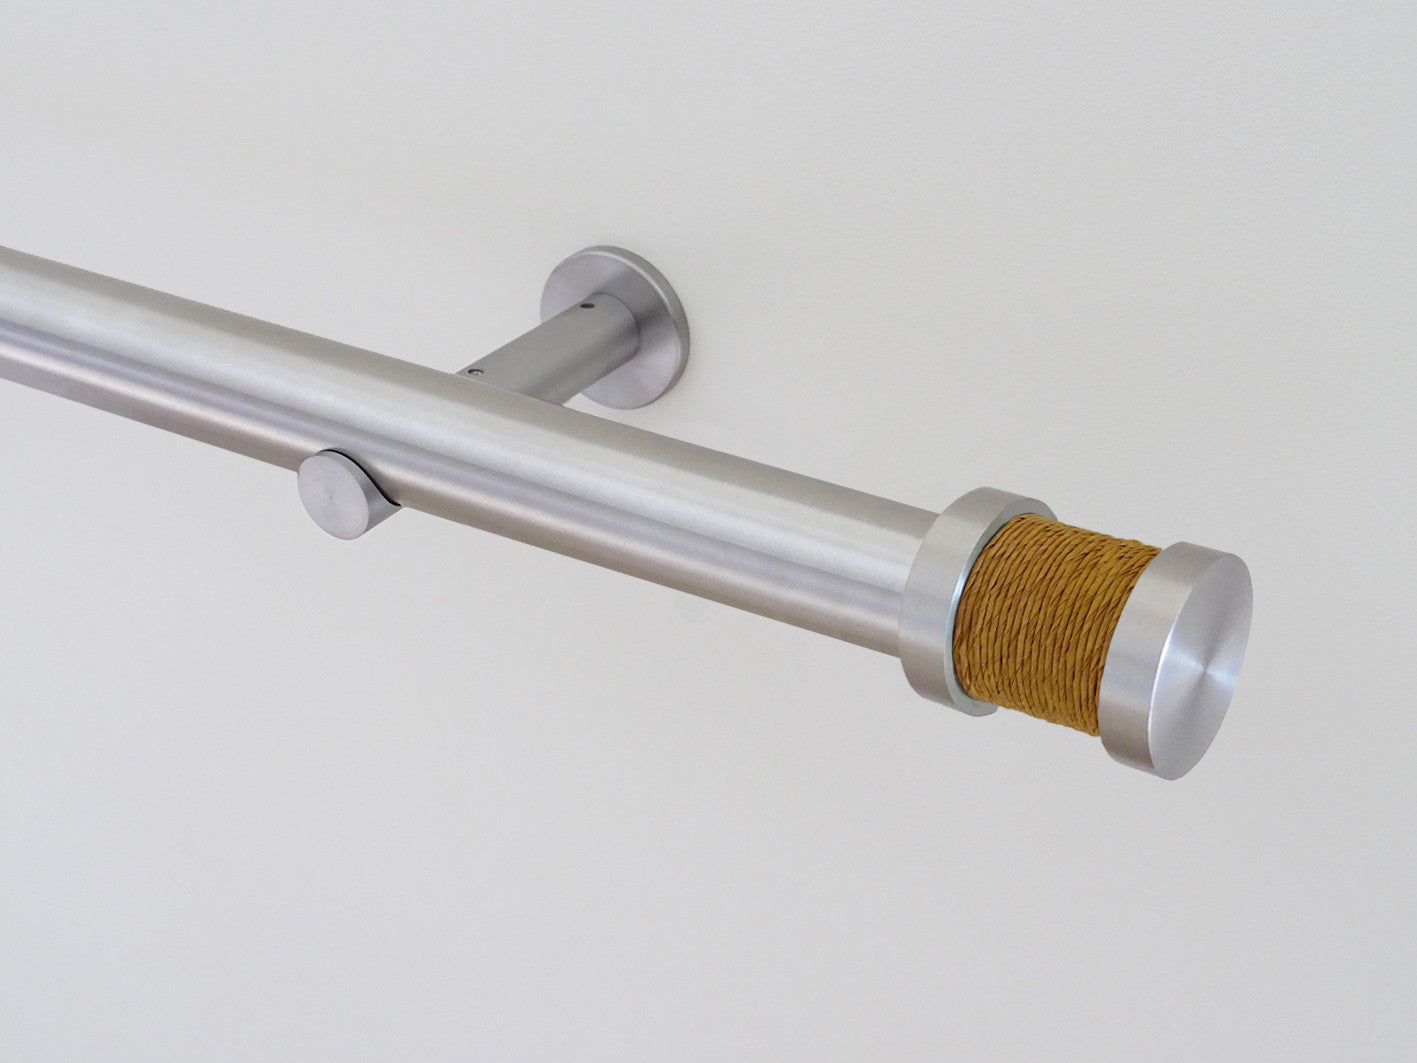 30mm diameter stainless steel curtain pole with old gold groove finials